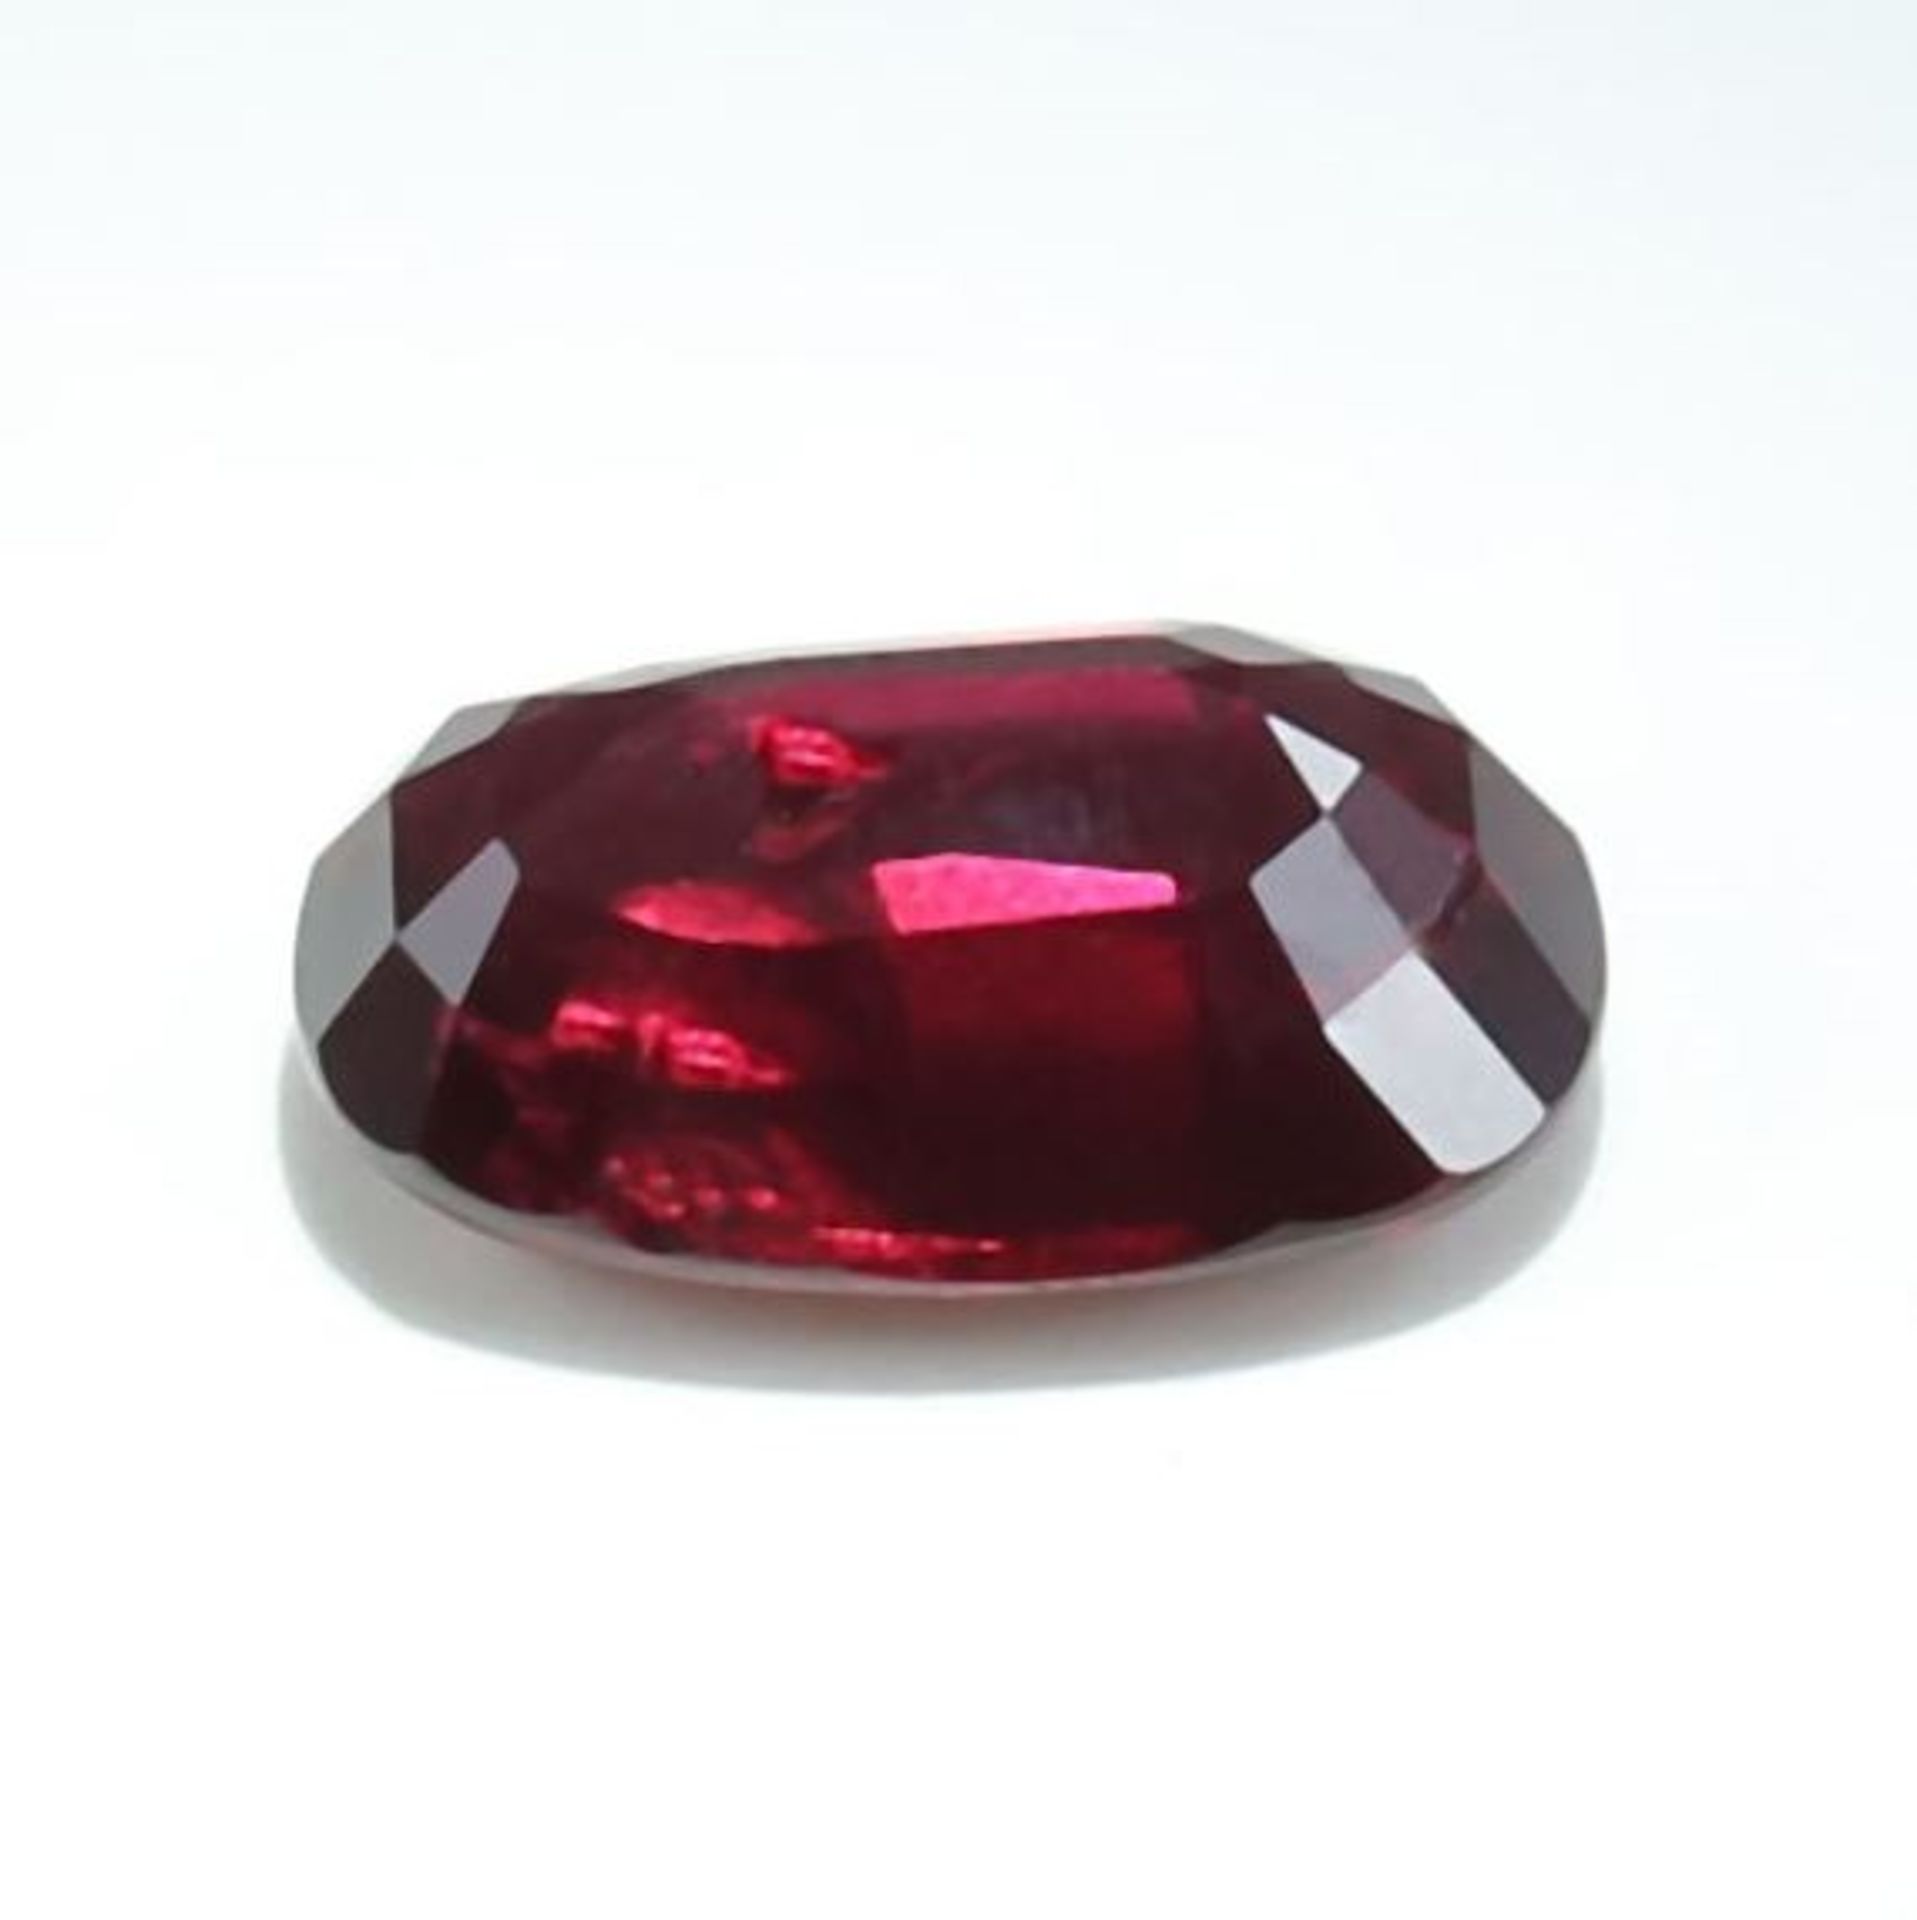 GRS Certified 5.02 ct. “Pigeon Blood” Ruby - Image 9 of 10